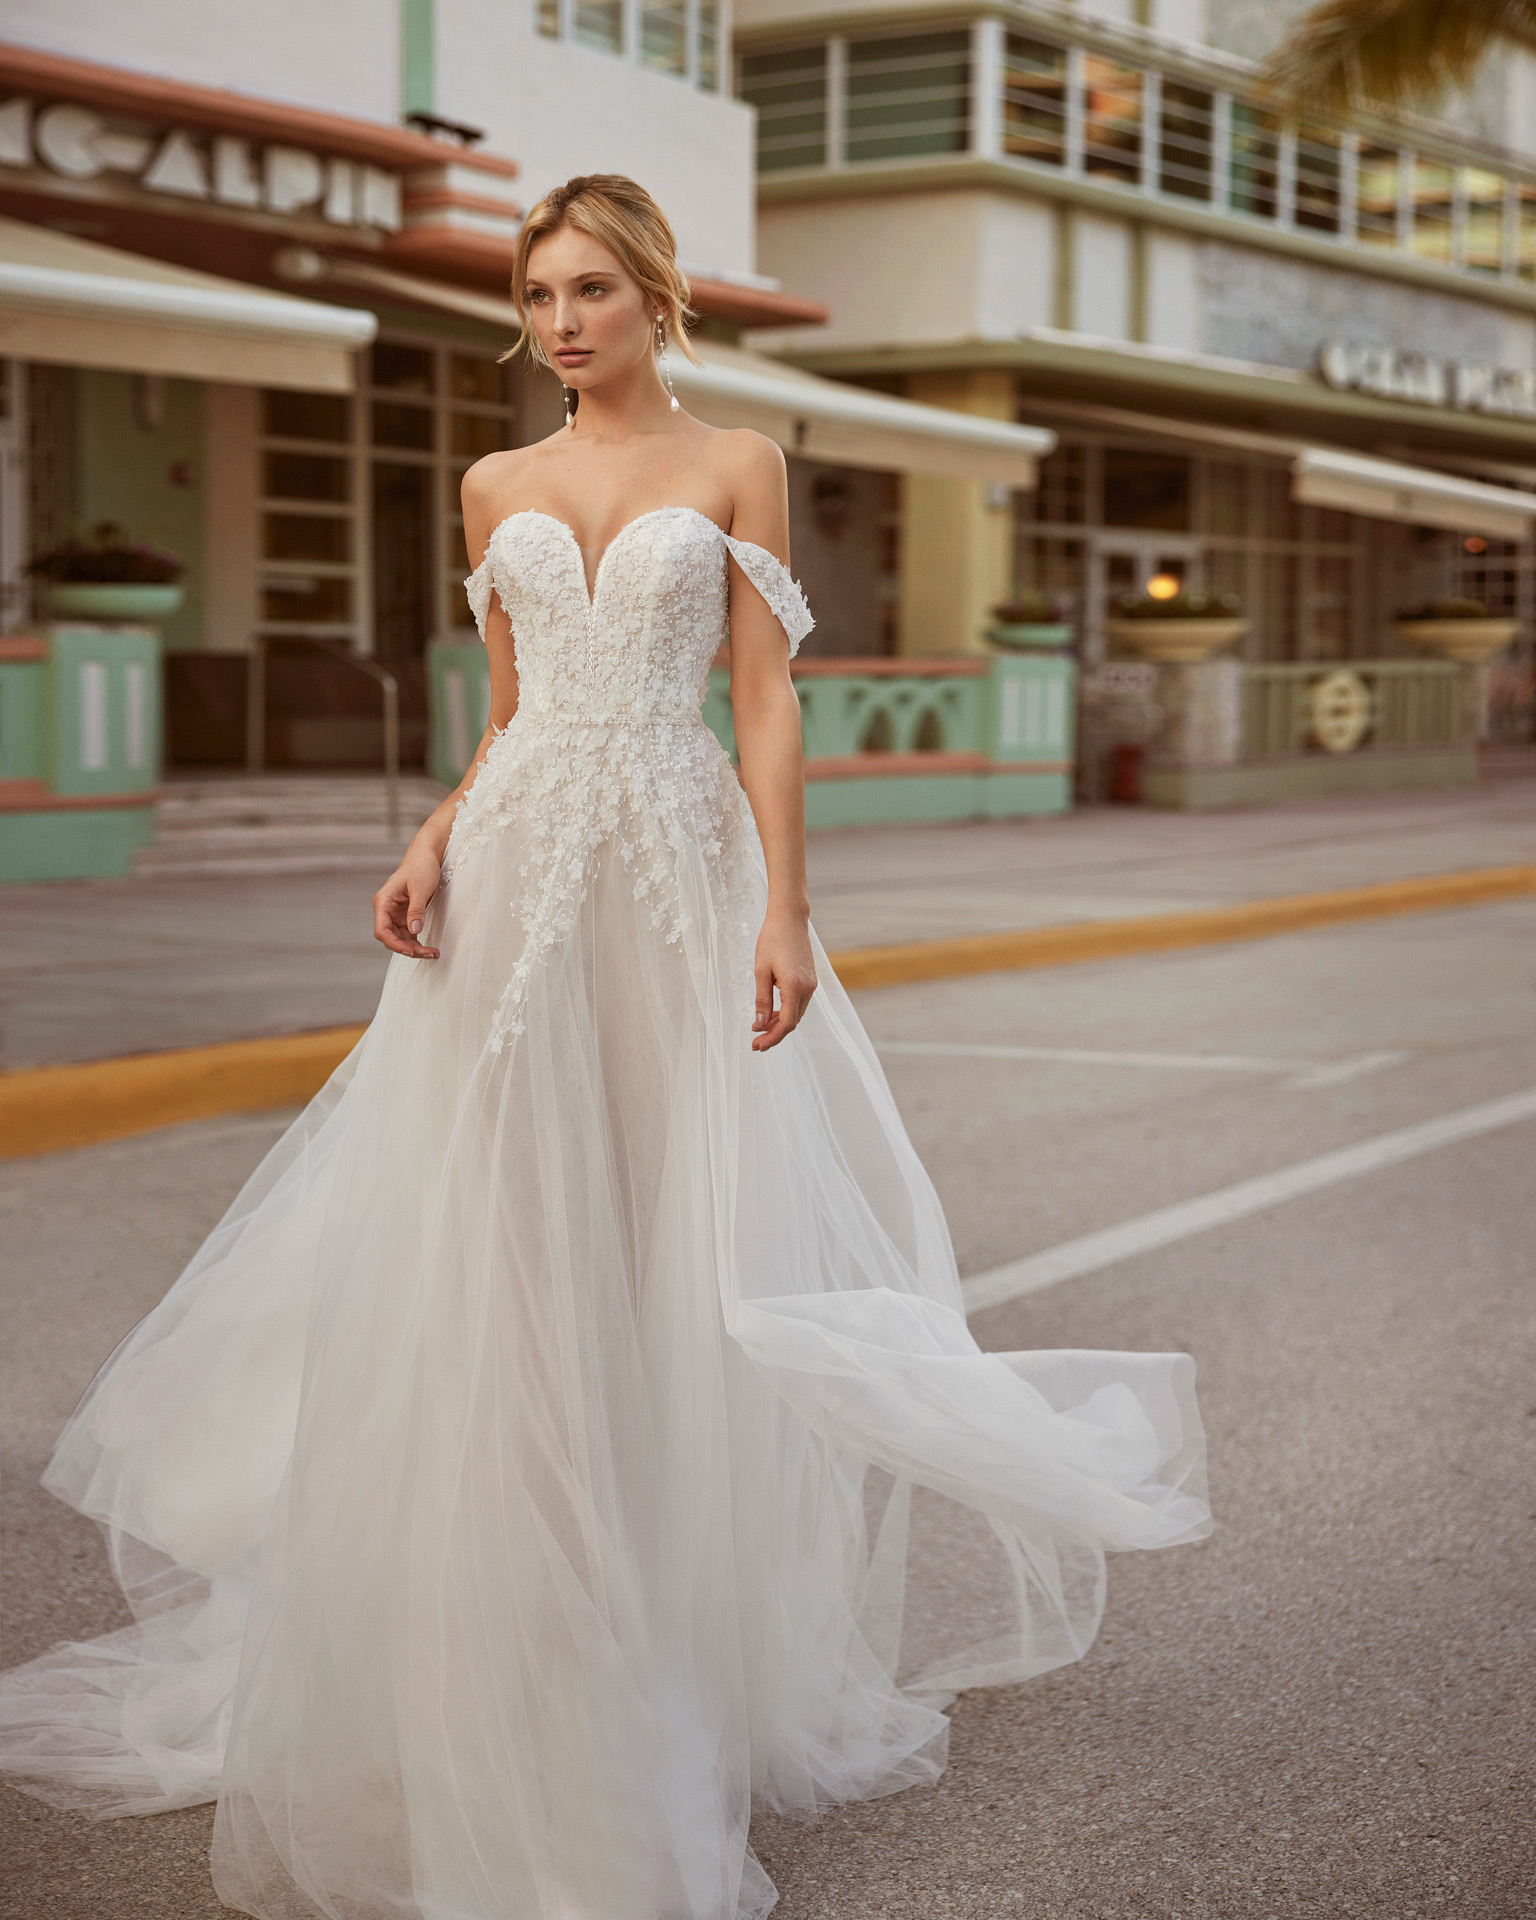 Romantic princess-style wedding dress, made in tulle and beadwork. This incredibly delicate Luna Novias design features a sweetheart neckline, back with pearl buttons, and detachable straps. LUNA_NOVIAS.